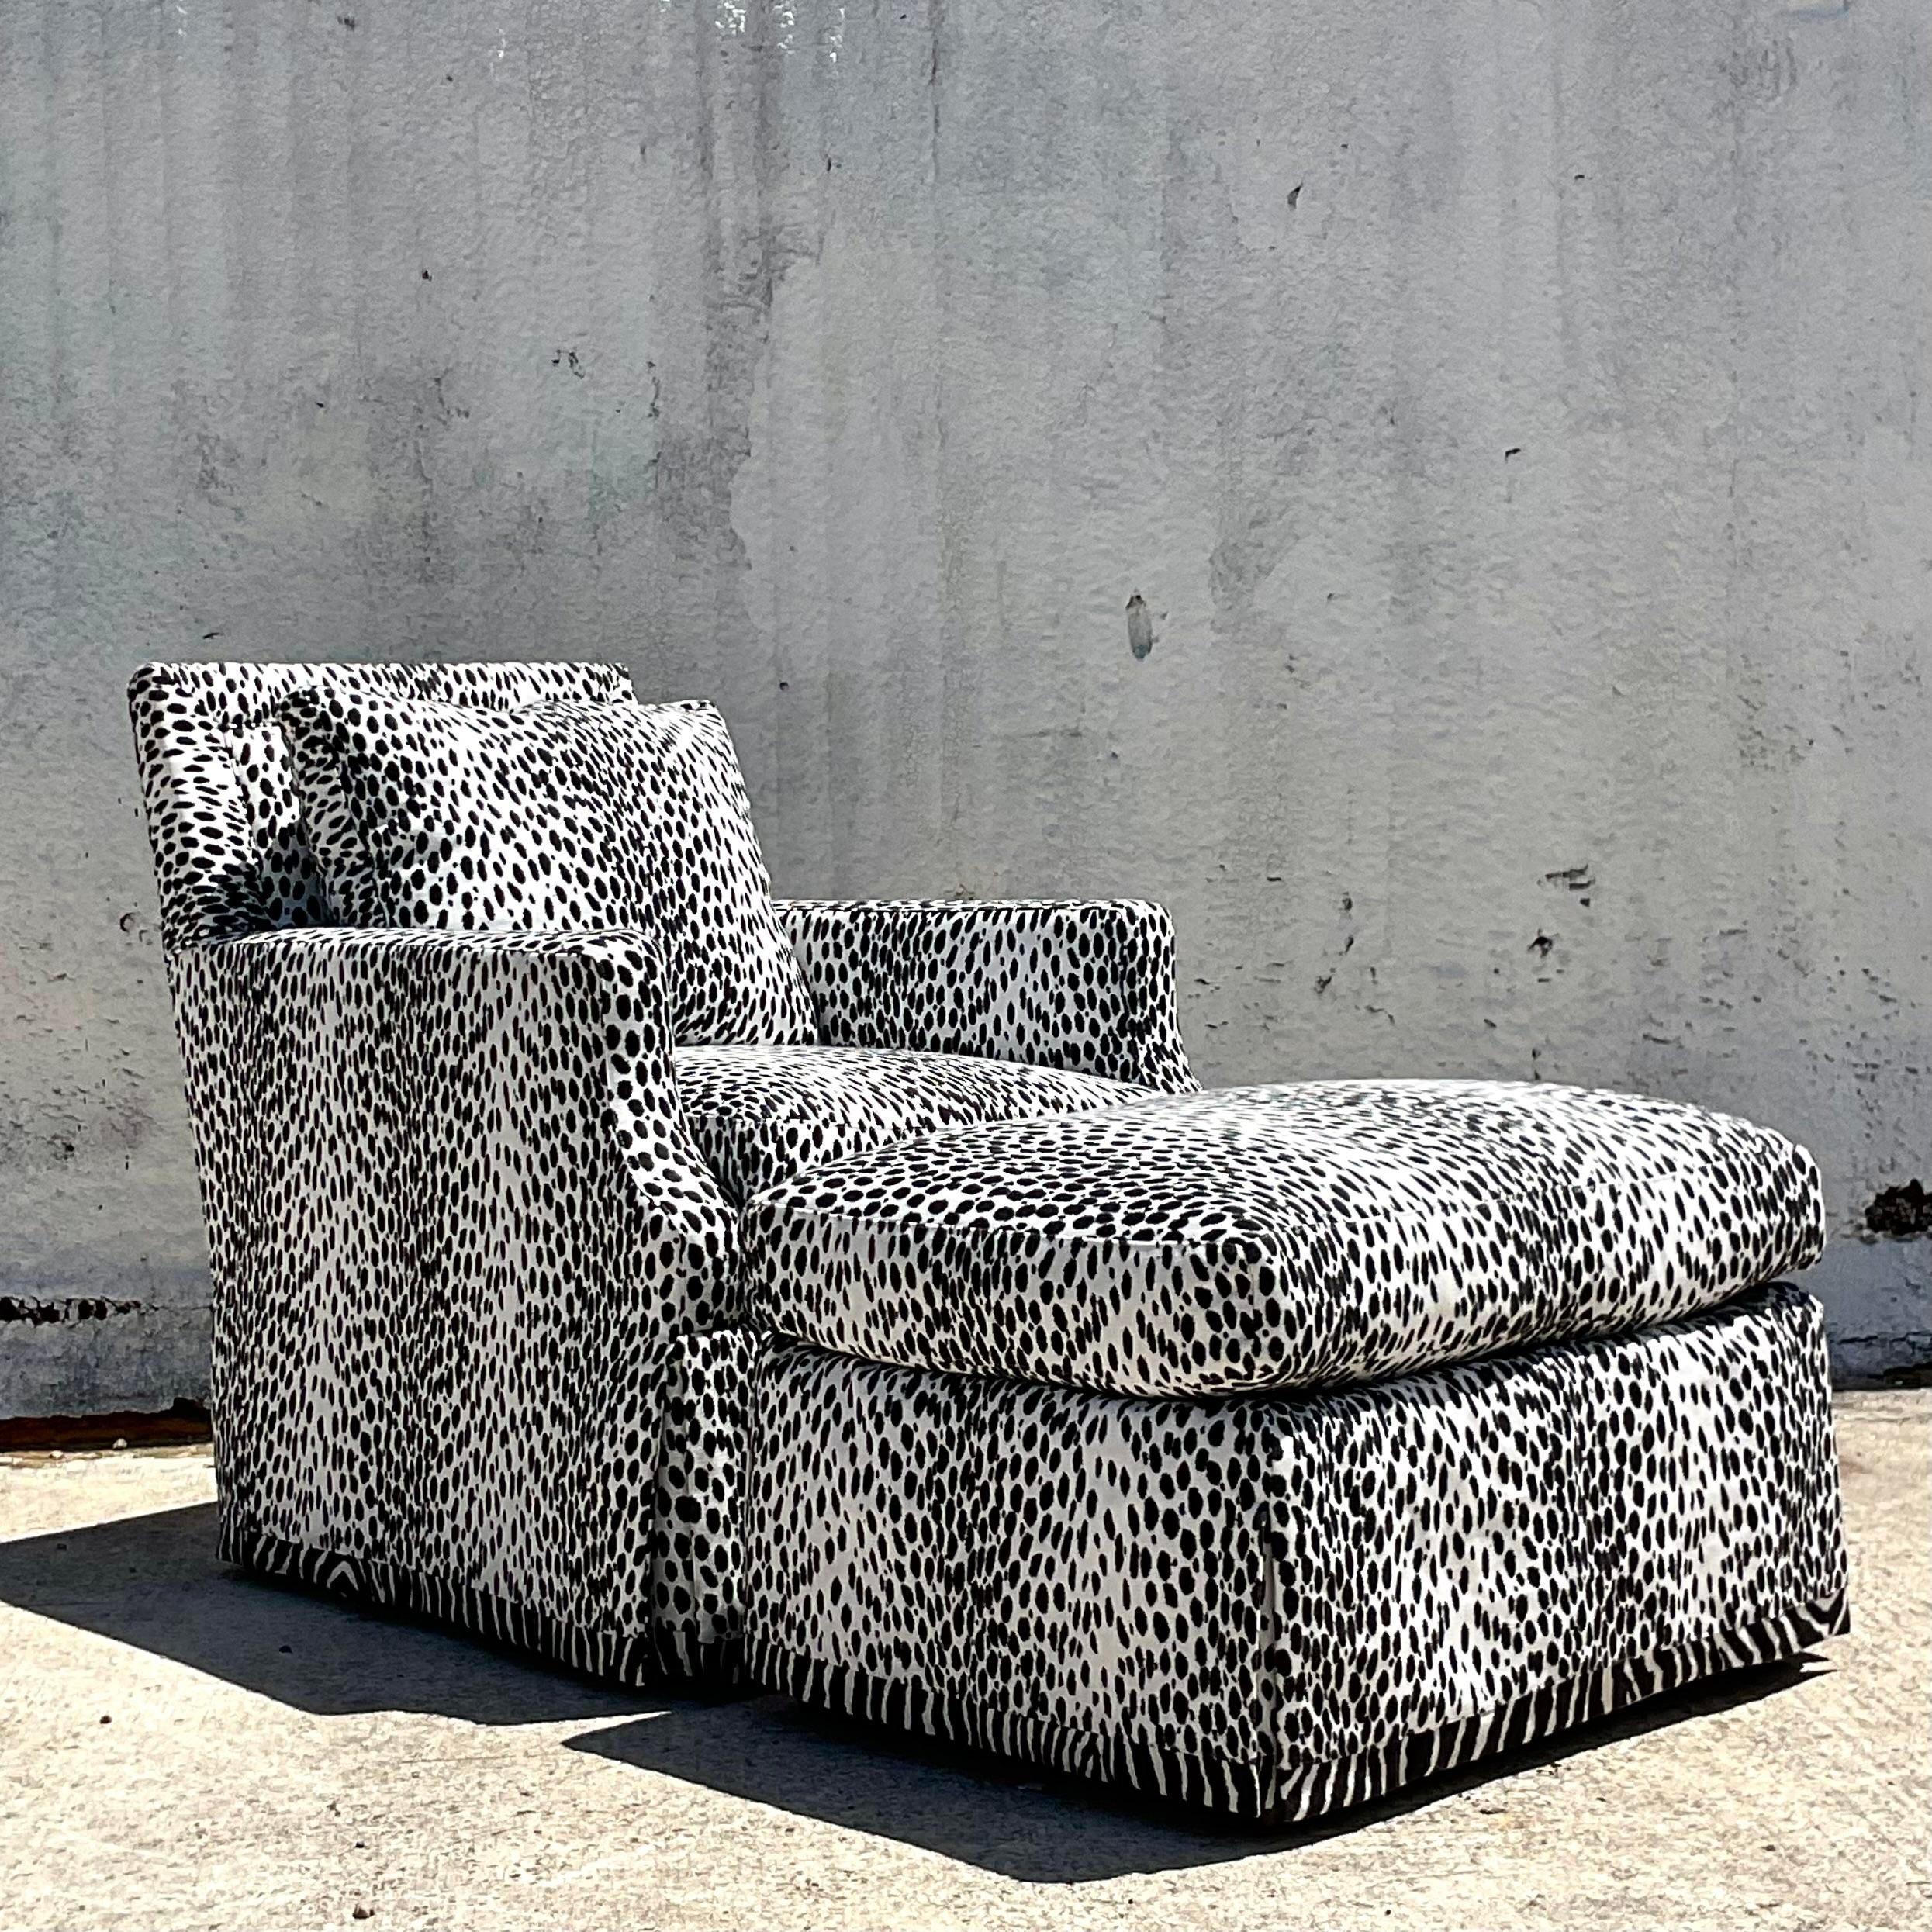 A stunning vintage Regency swivel chair and ottoman. Made by the iconic Lee Industries and tagged below the cushion. A brilliant graphic Bob Collins “Bobcat” animal print upholstery. Acquired from a Palm Beach estate.